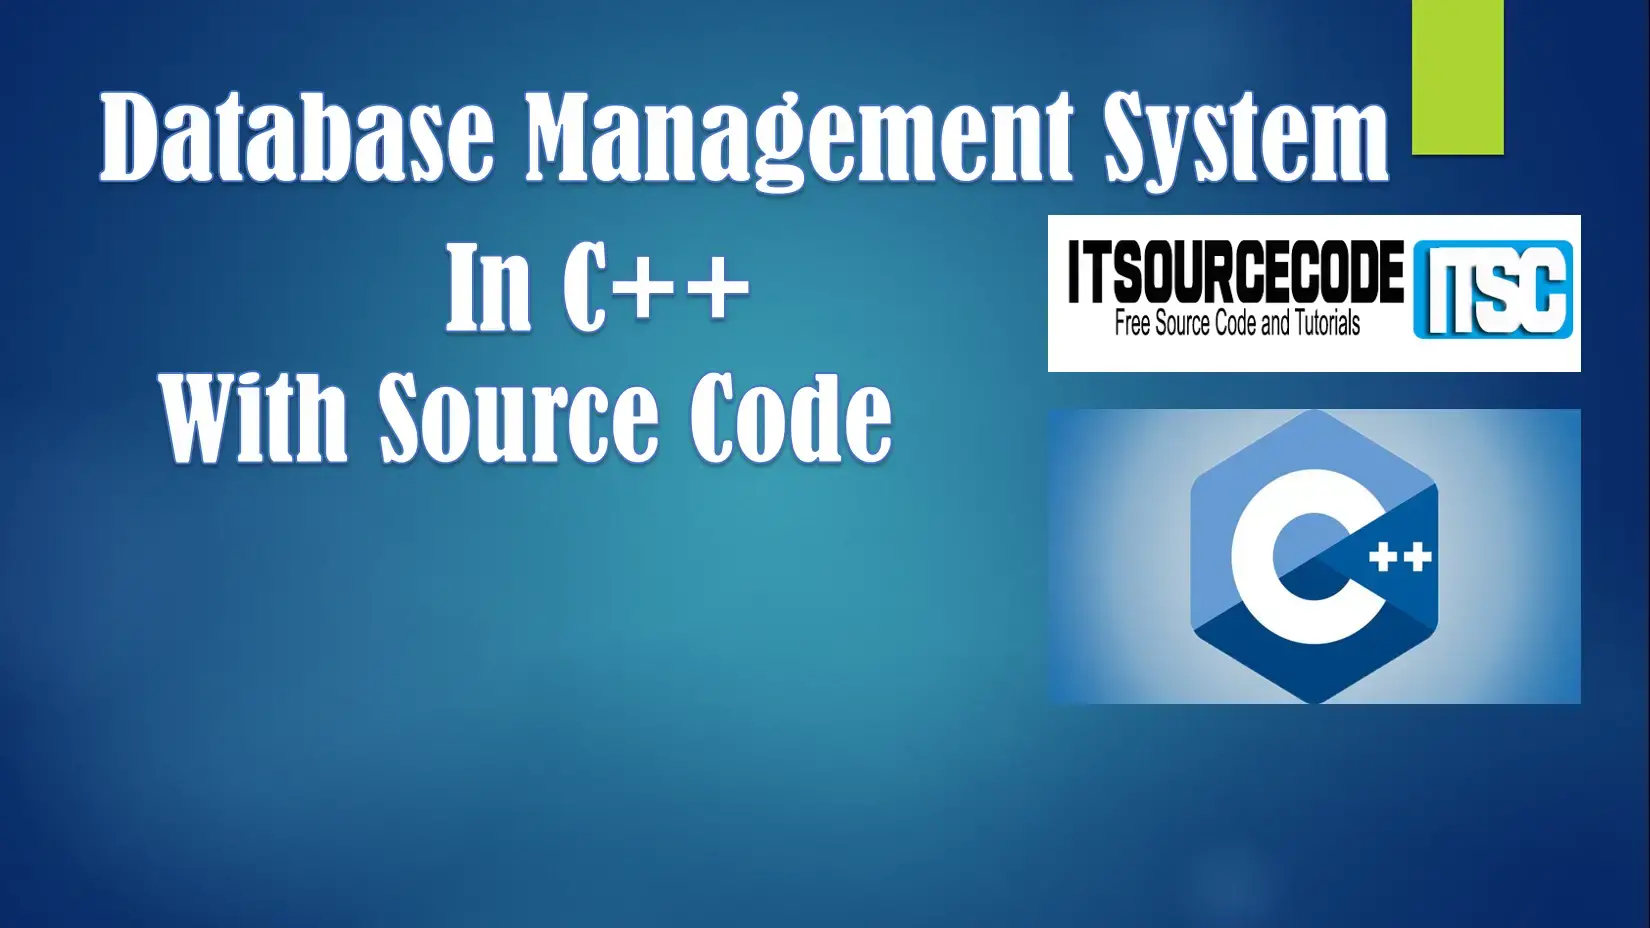 Database Management System In C++ With Source Code